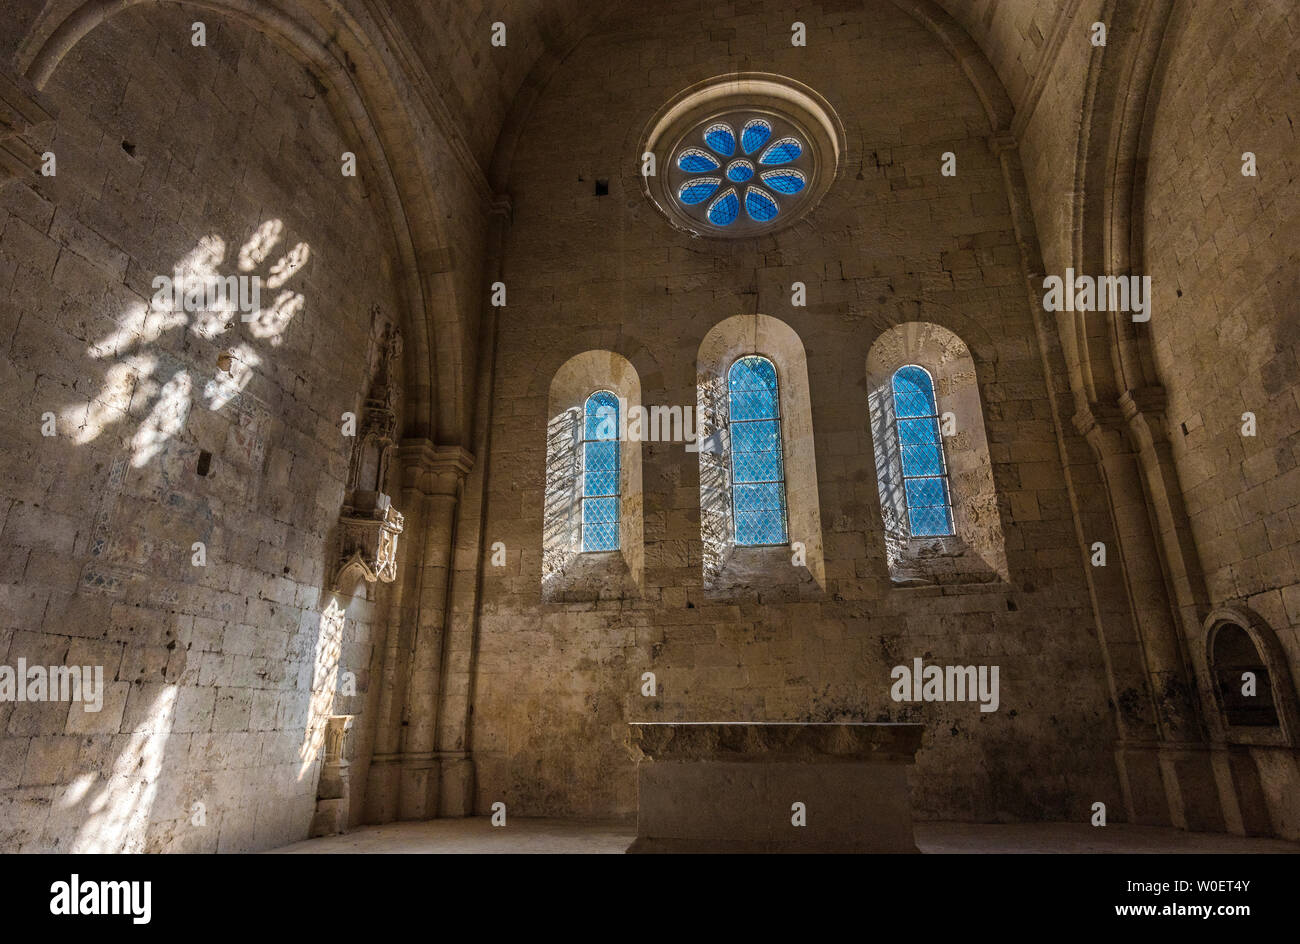 France, Provence, Bouches-du-Rhône, inside of the church of the cistercian abbey of Silvacane (12th-13th century ) Stock Photo